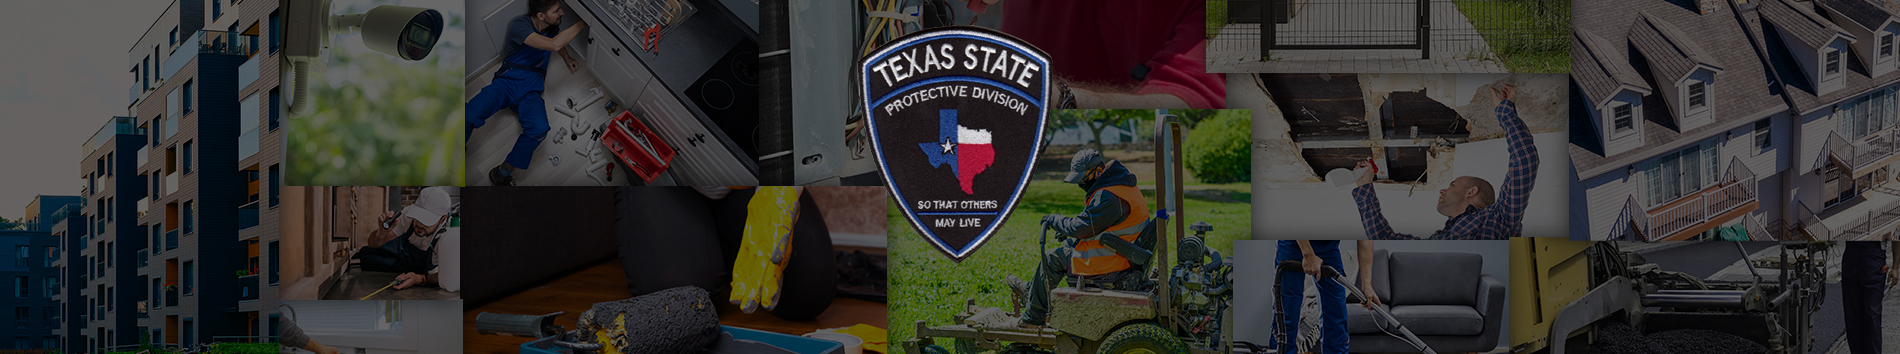 Texas State Protective Division